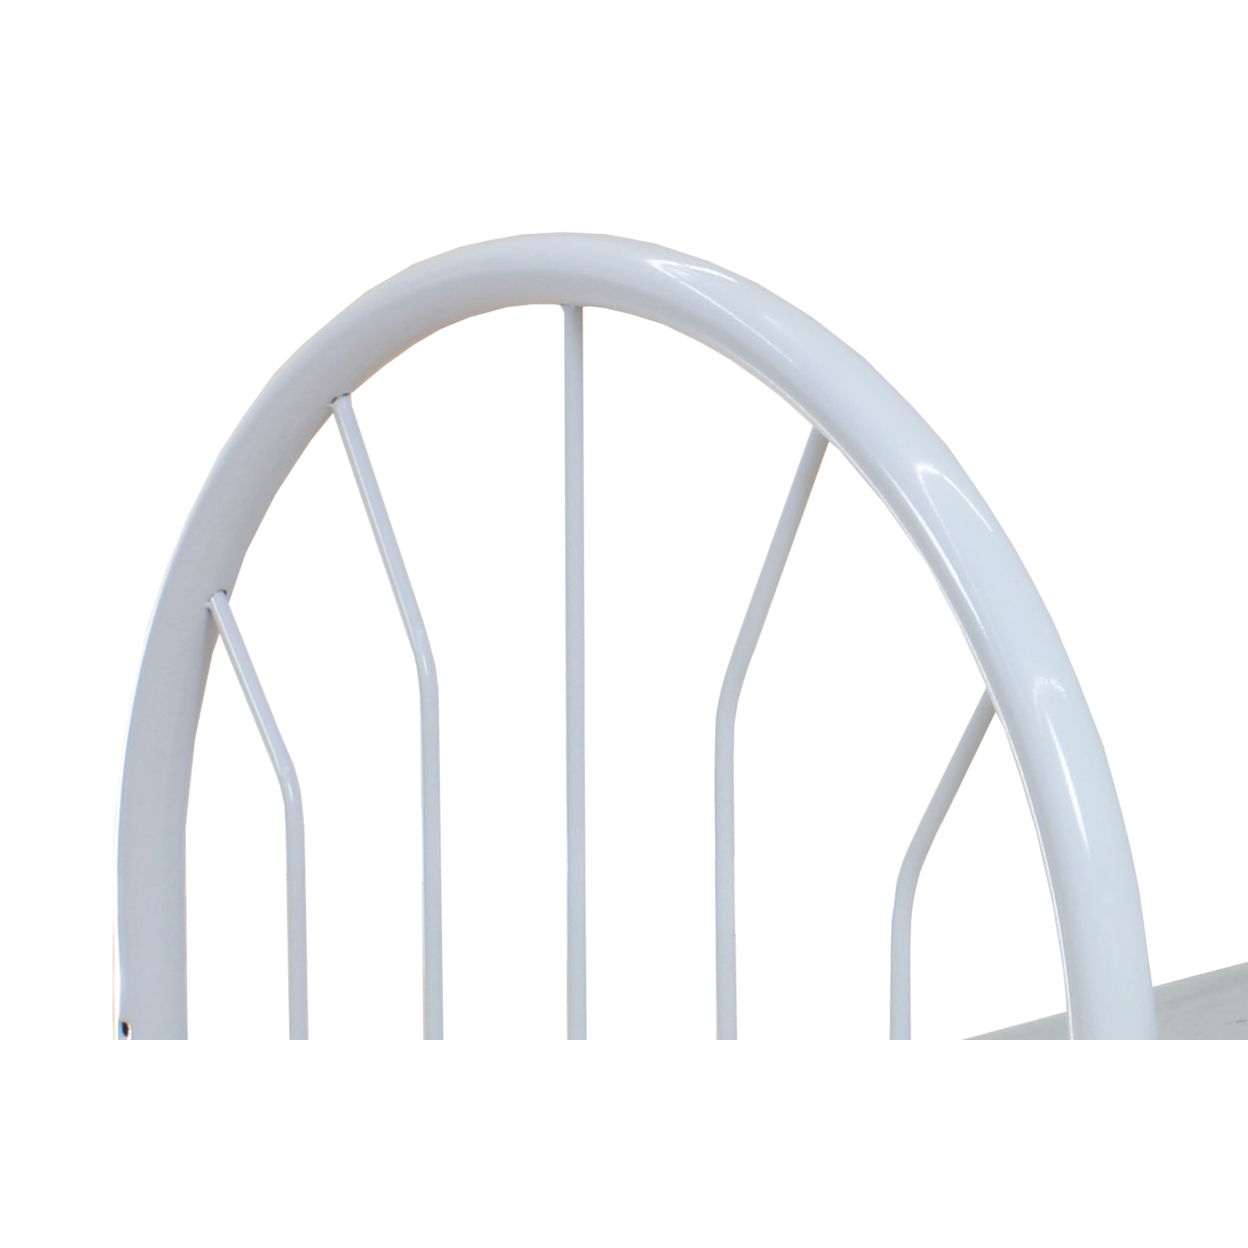 Metal Twin Headboard And Footboard With Curved Spindles, White- Saltoro Sherpi